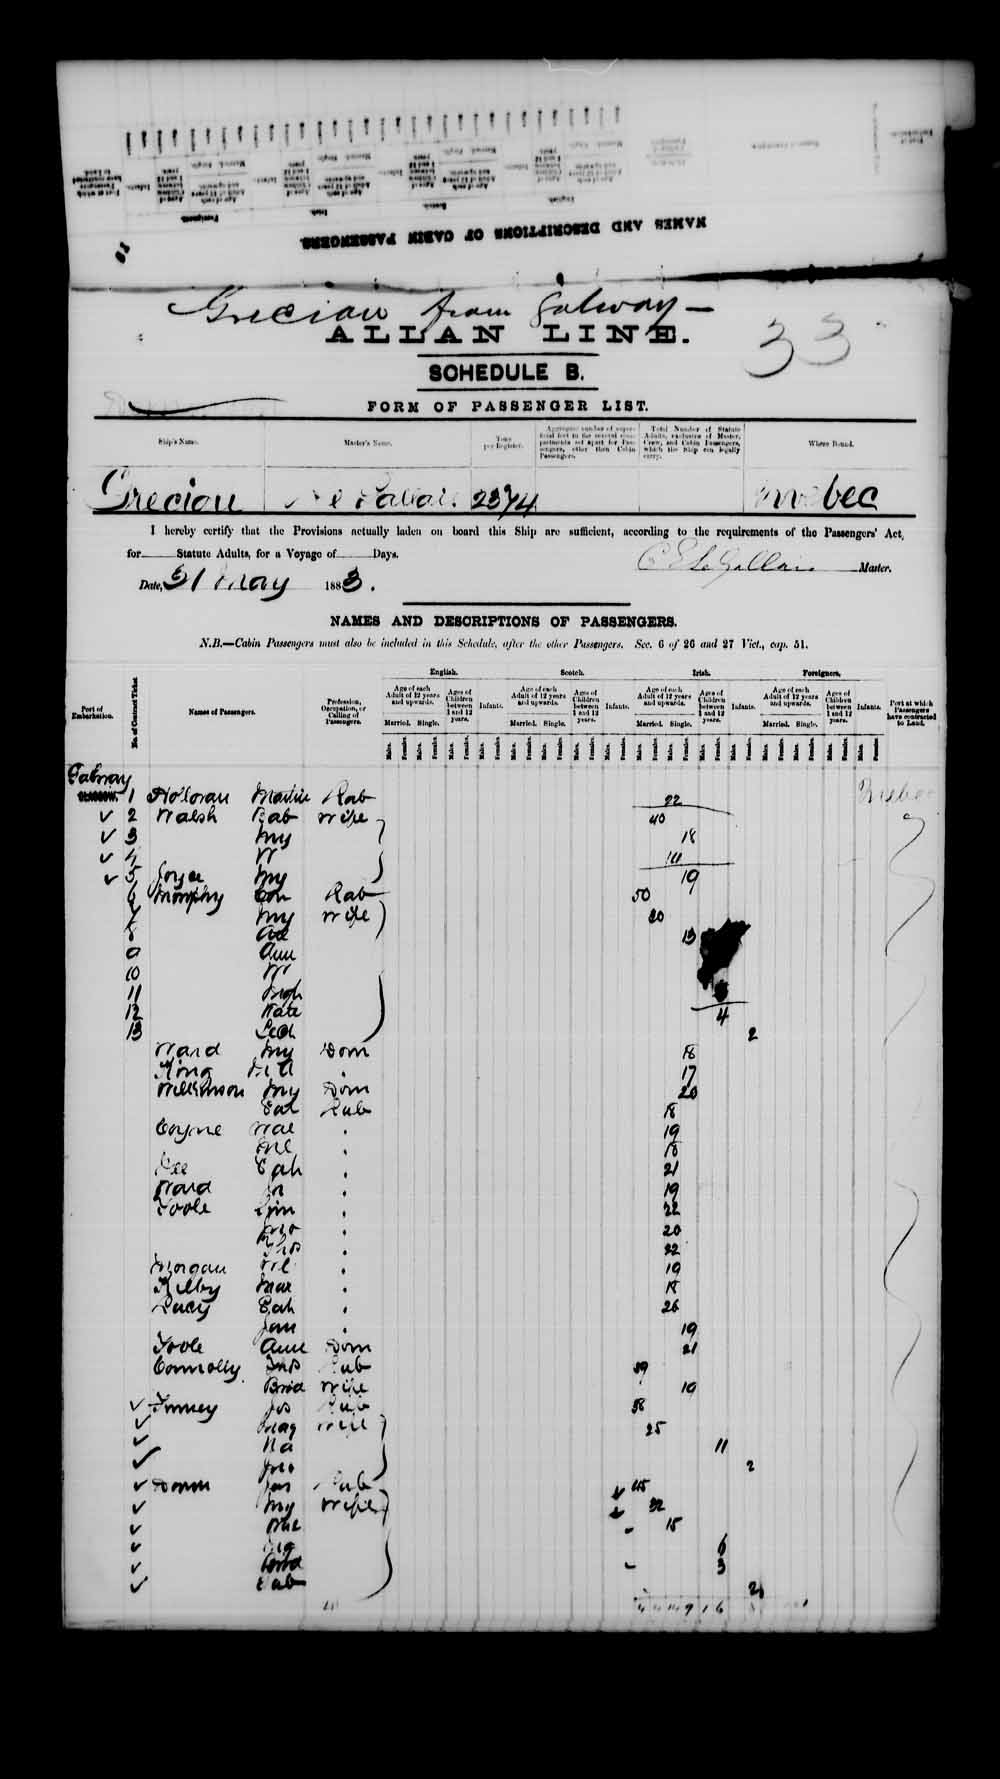 Digitized page of Passenger Lists for Image No.: e003543100